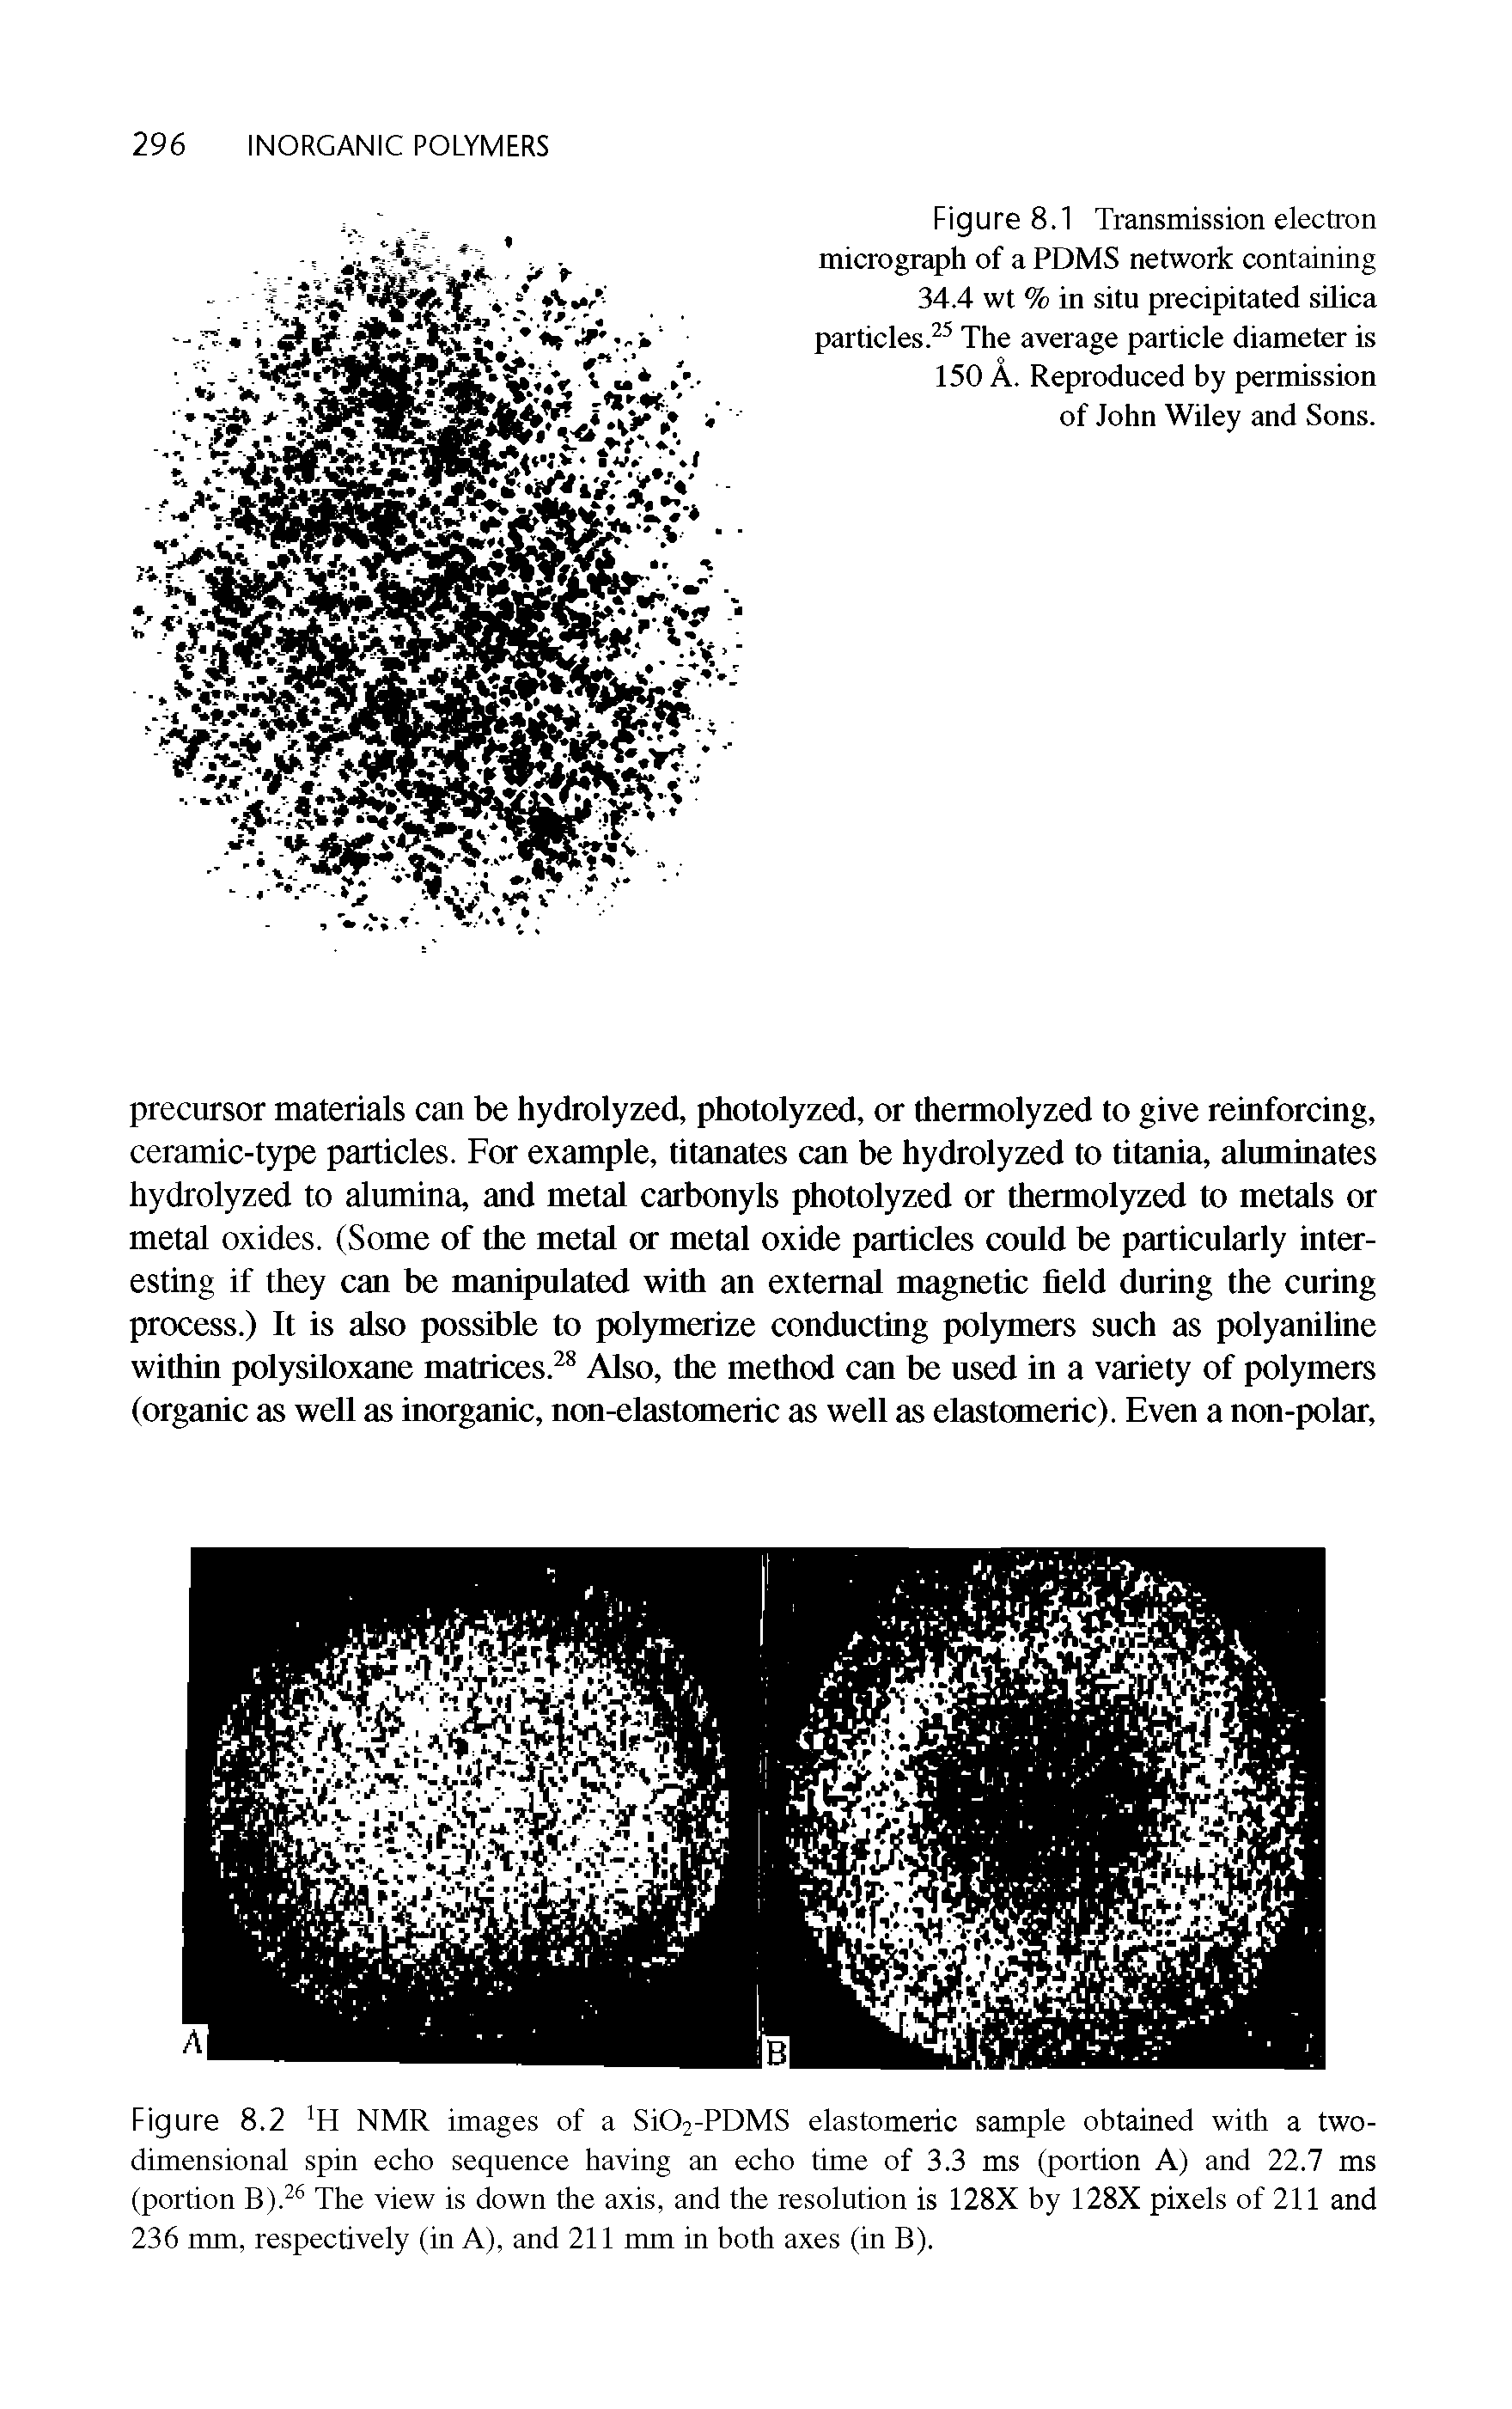 Figure 8.1 Transmission electron micrograph of a PDMS network containing 34.4 wt % in situ precipitated silica particles.25 The average particle diameter is 150 A. Reproduced by permission of John Wiley and Sons.